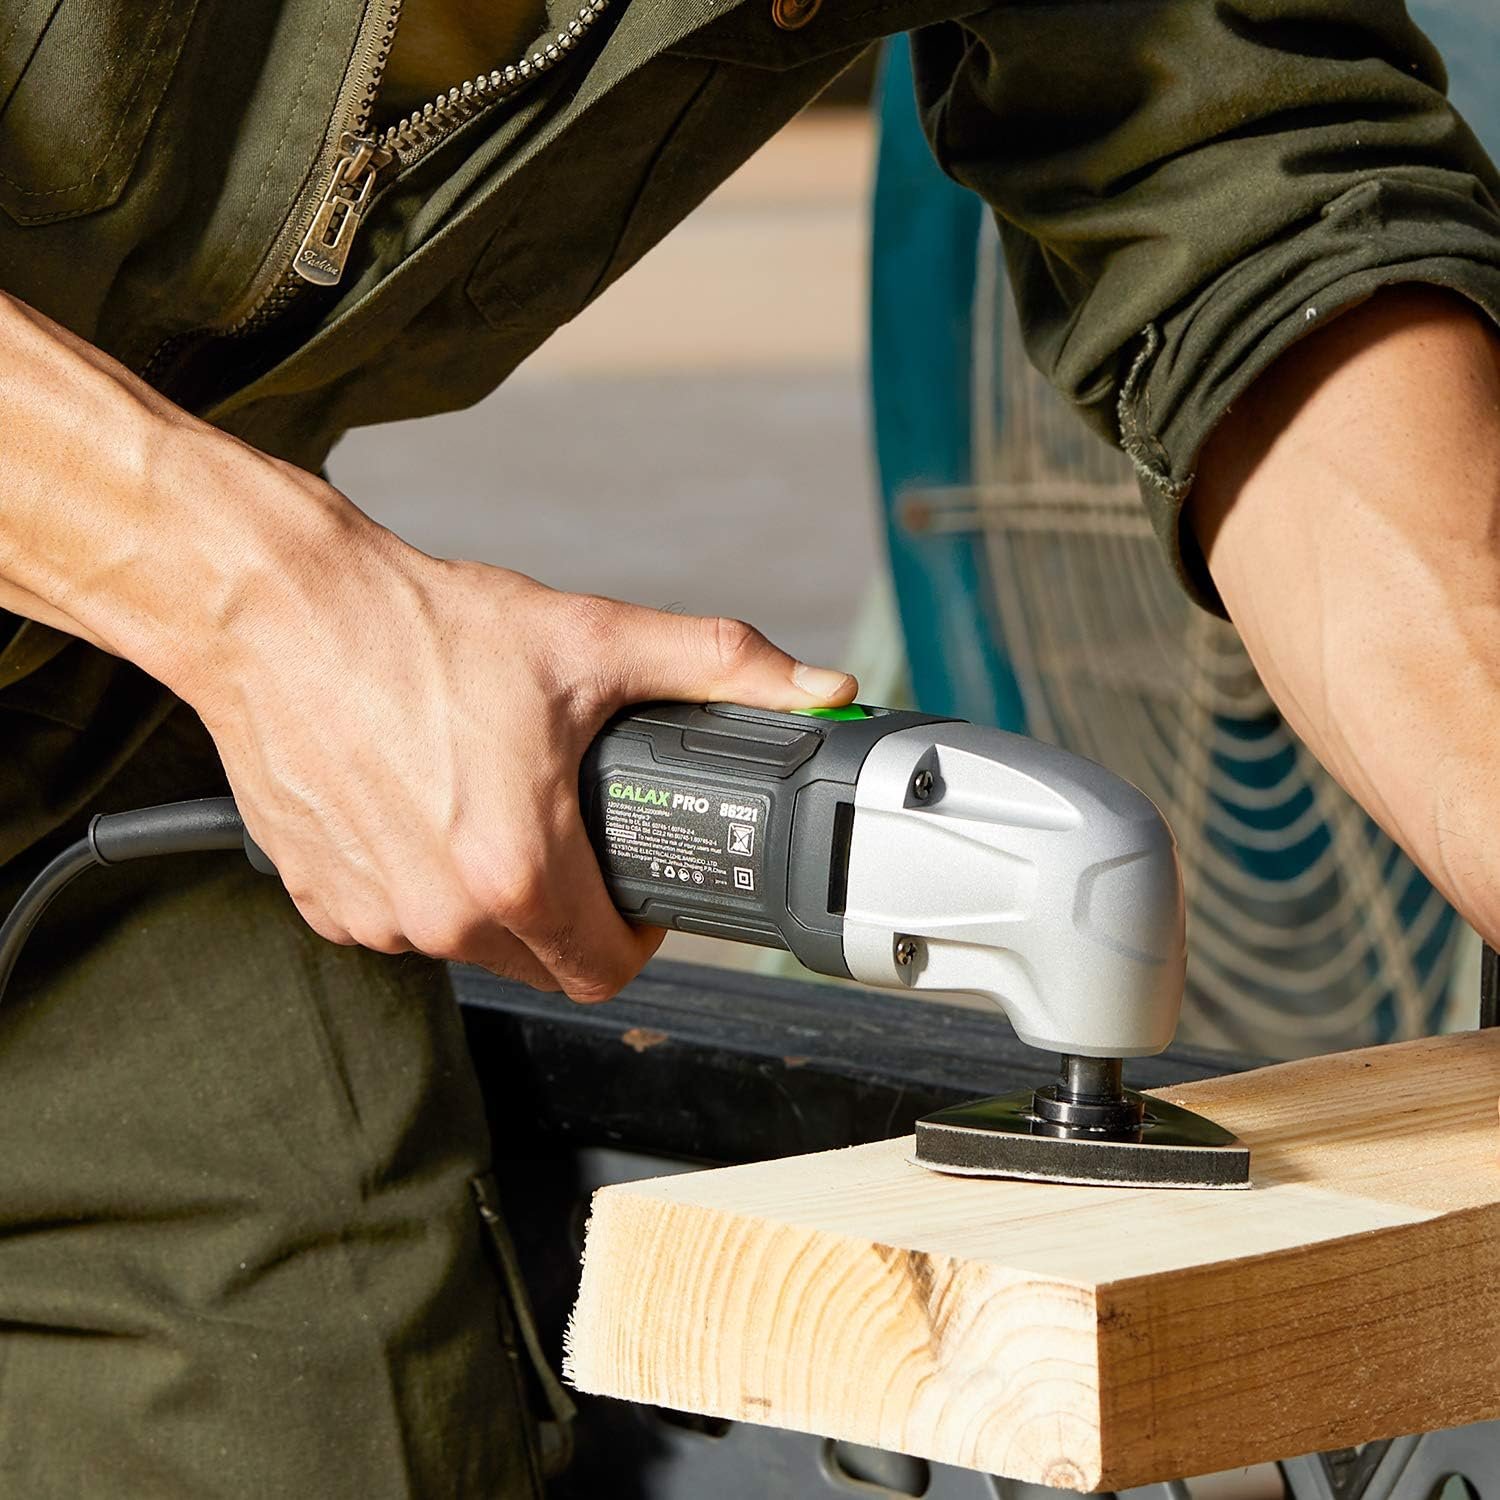 GALAX PRO 22000 OPM 1.5A Oscillating Multi Tool Review